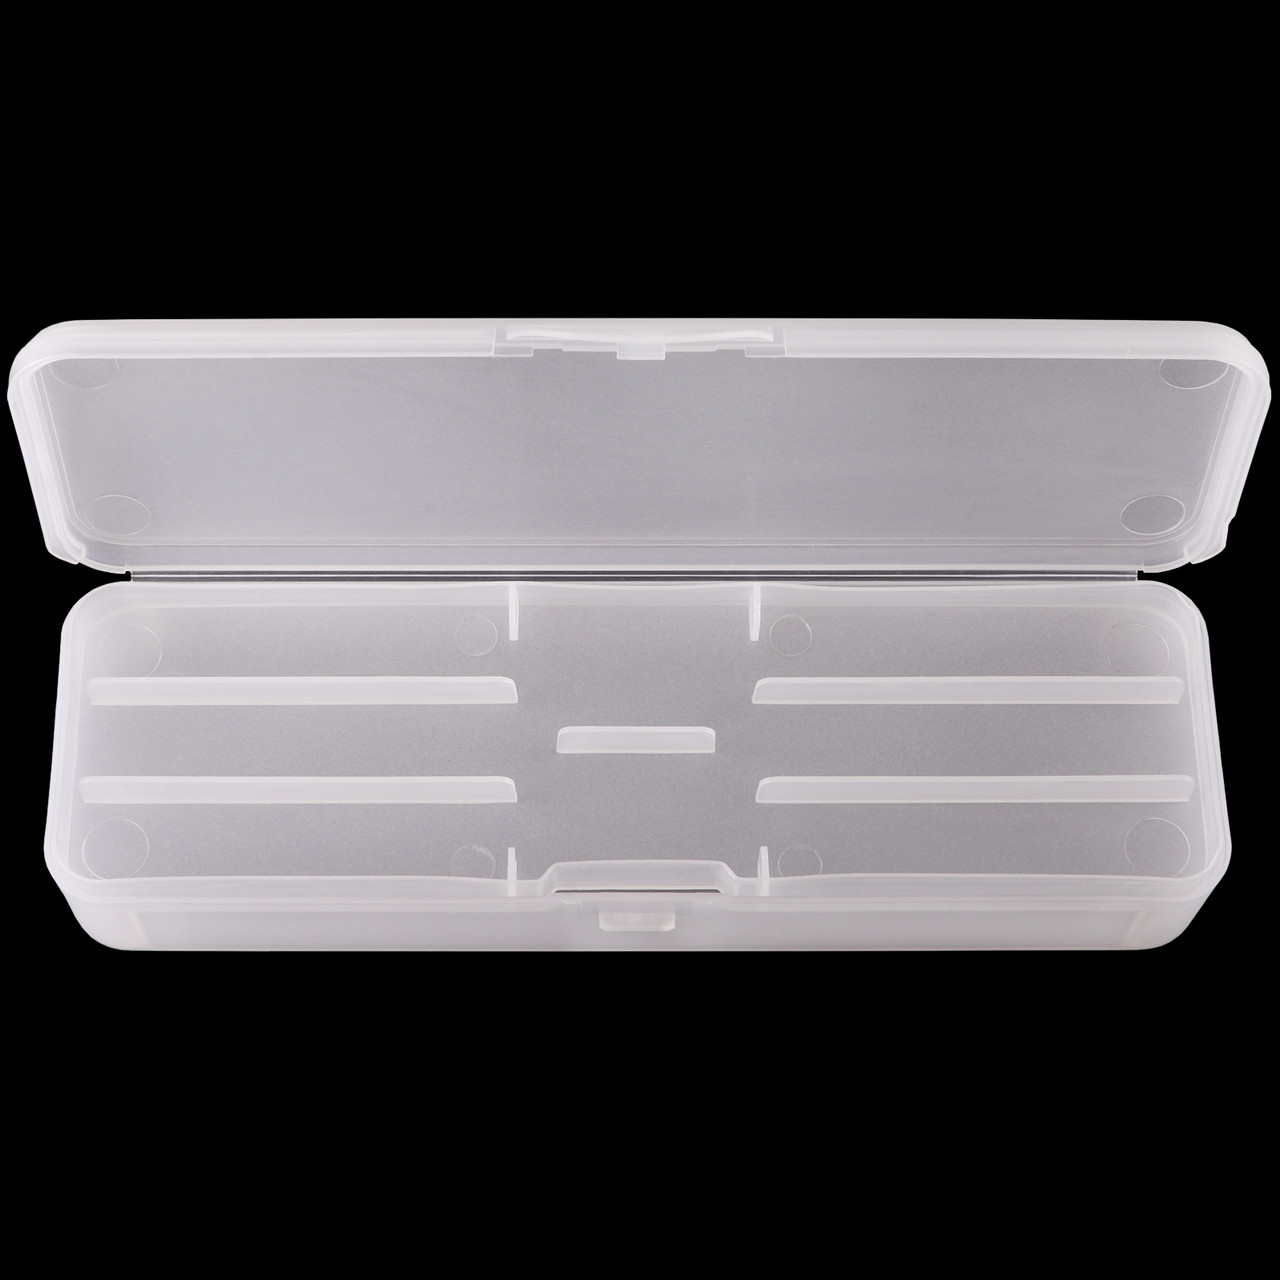 Double-Layer Personal Storage Case